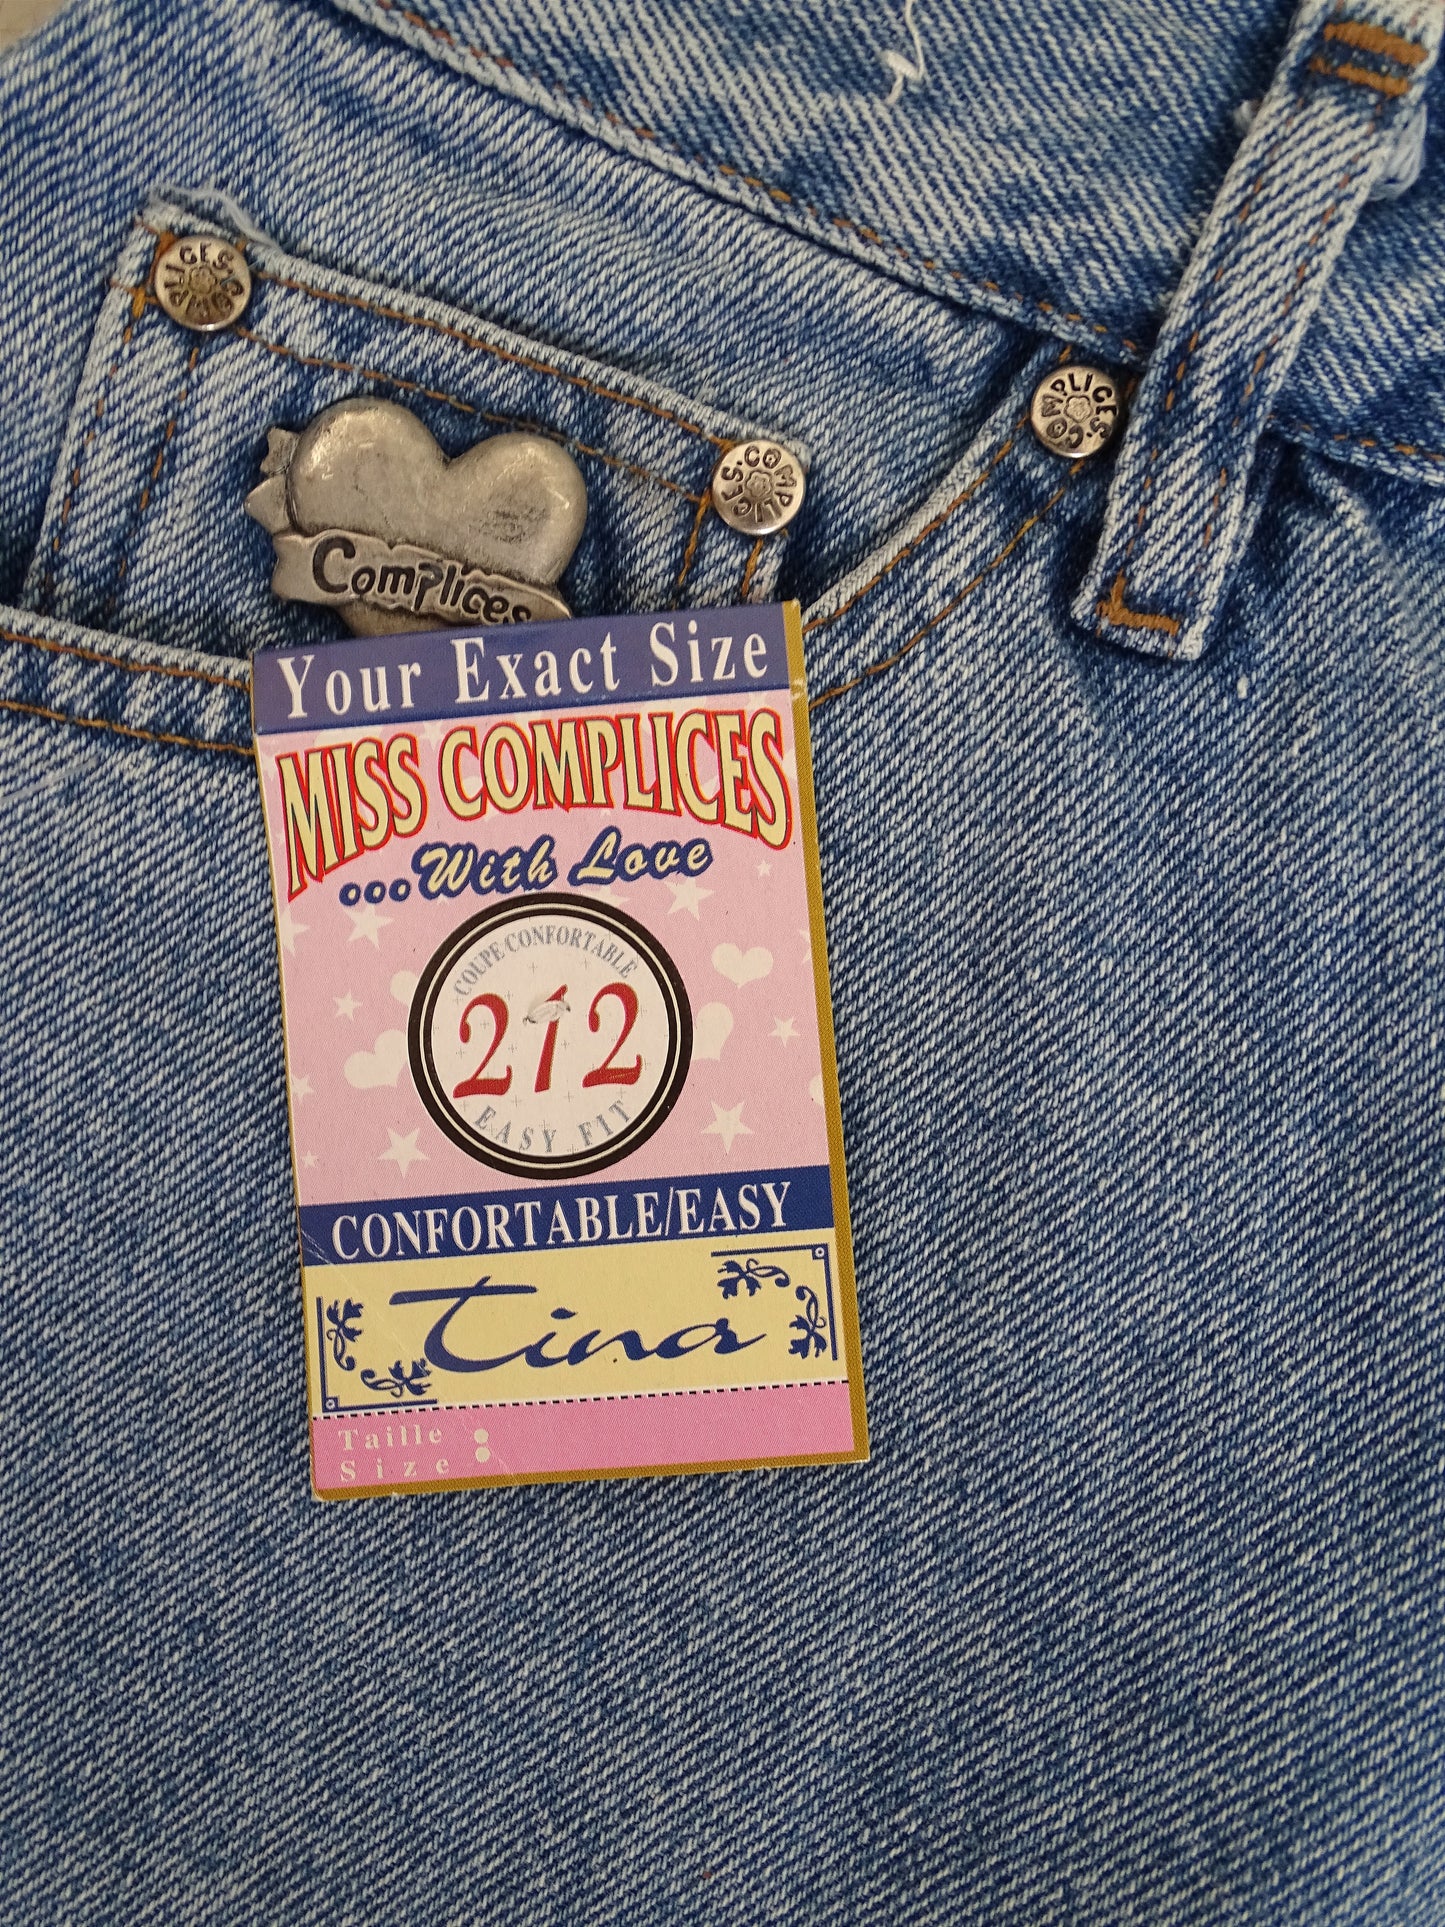 JEAN COMPLICES VINTAGE NEUF